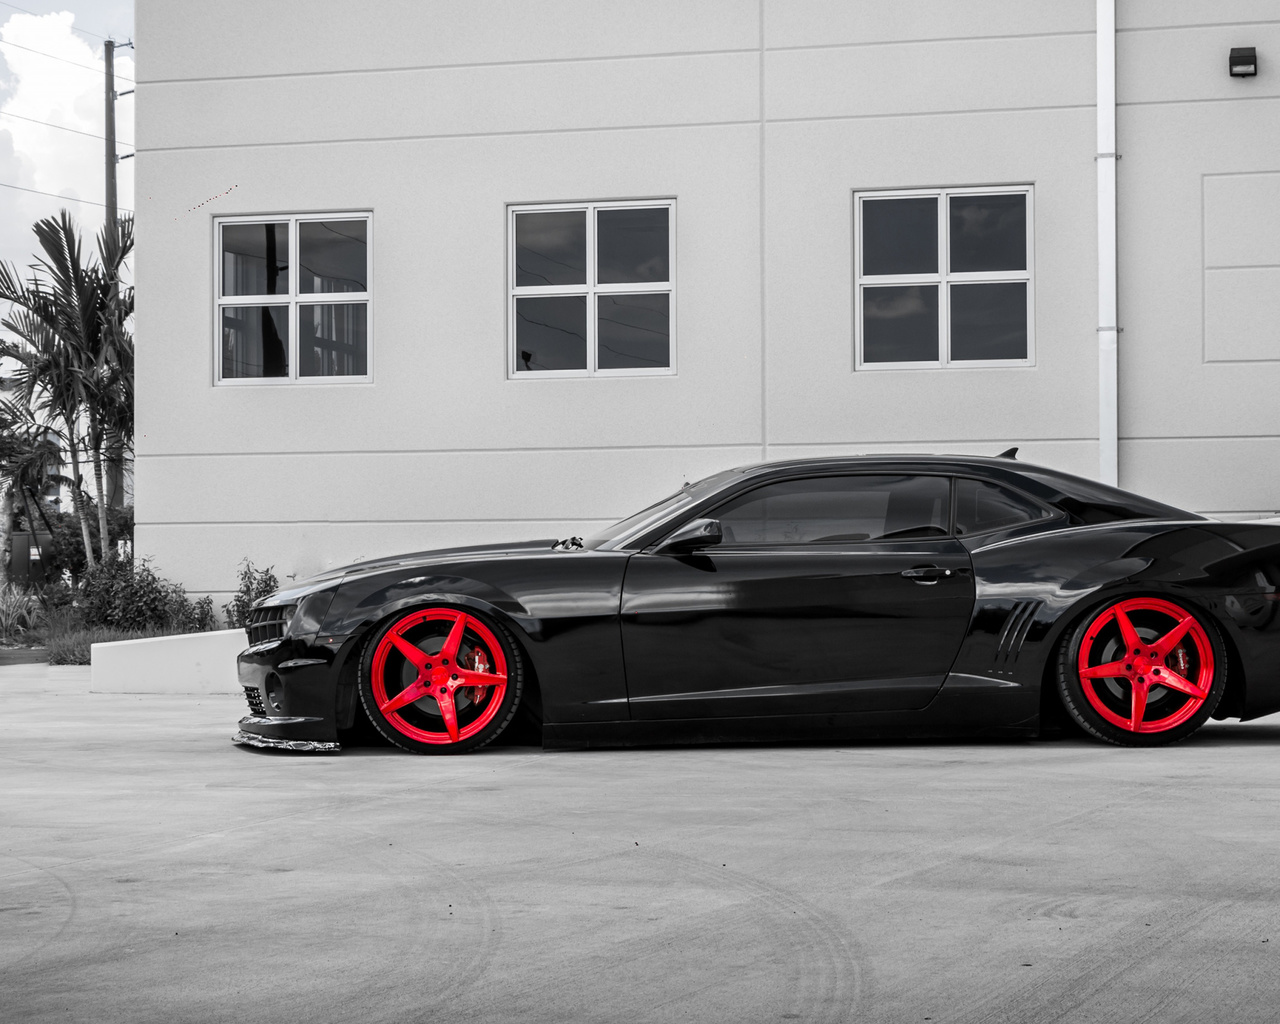 chevrolet, camaro, black, supercar, red, wheels, side view, tuning